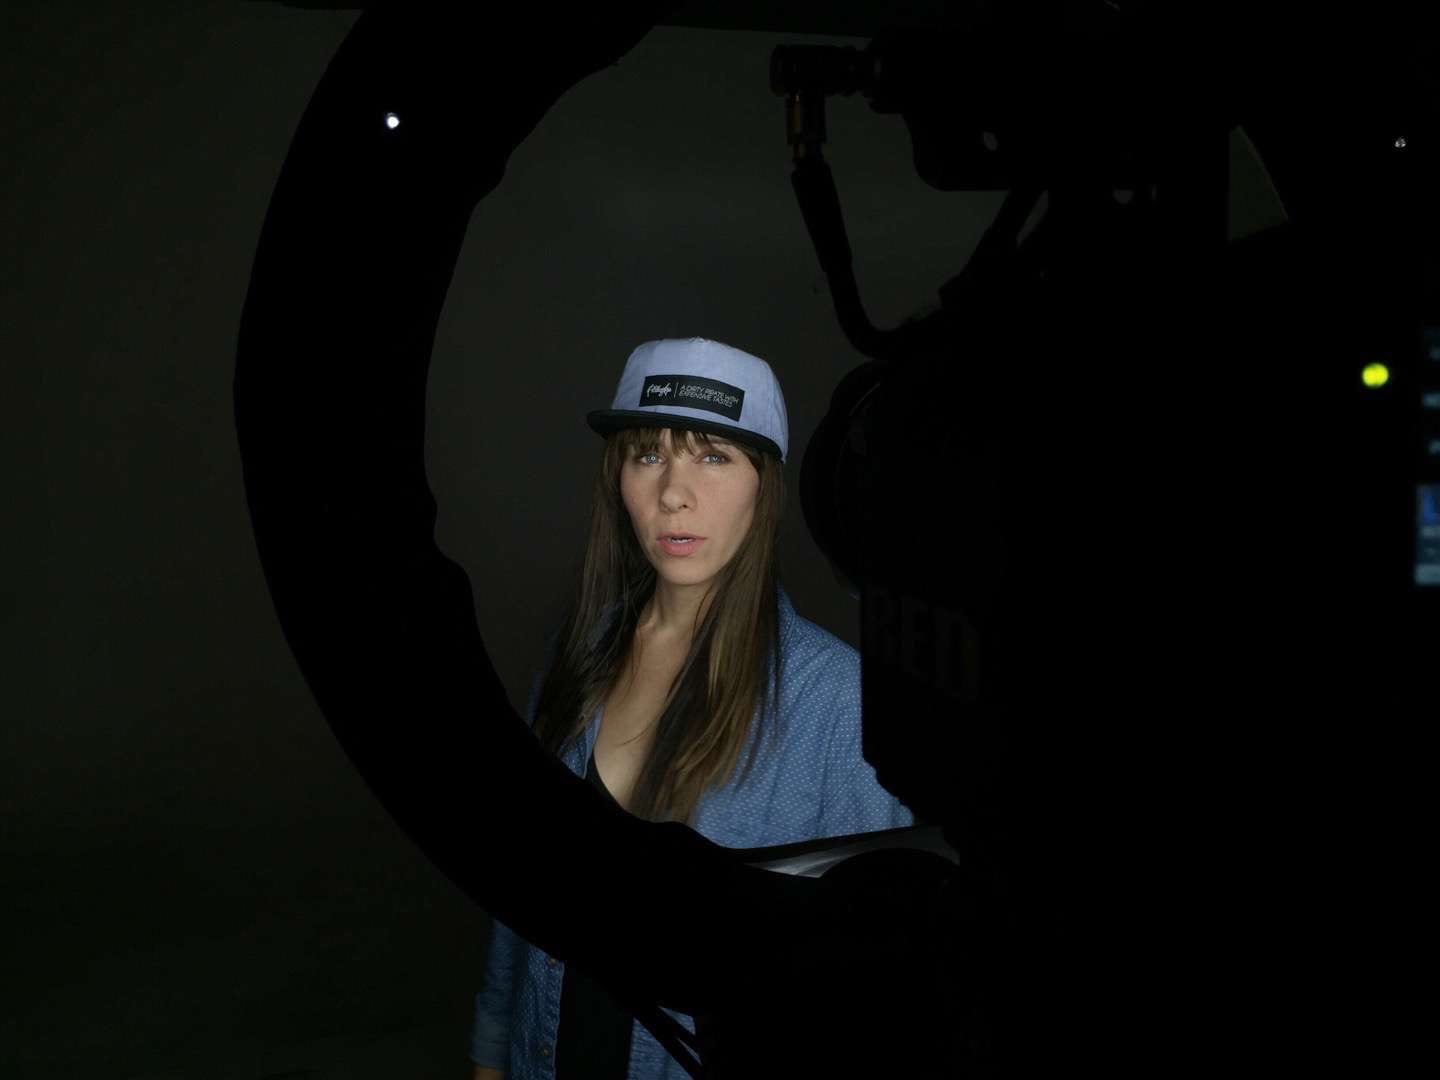 Filibuster Apparel Woman with long brown hair in a blue shirt wearing a light blue hat with black rim by video equipment